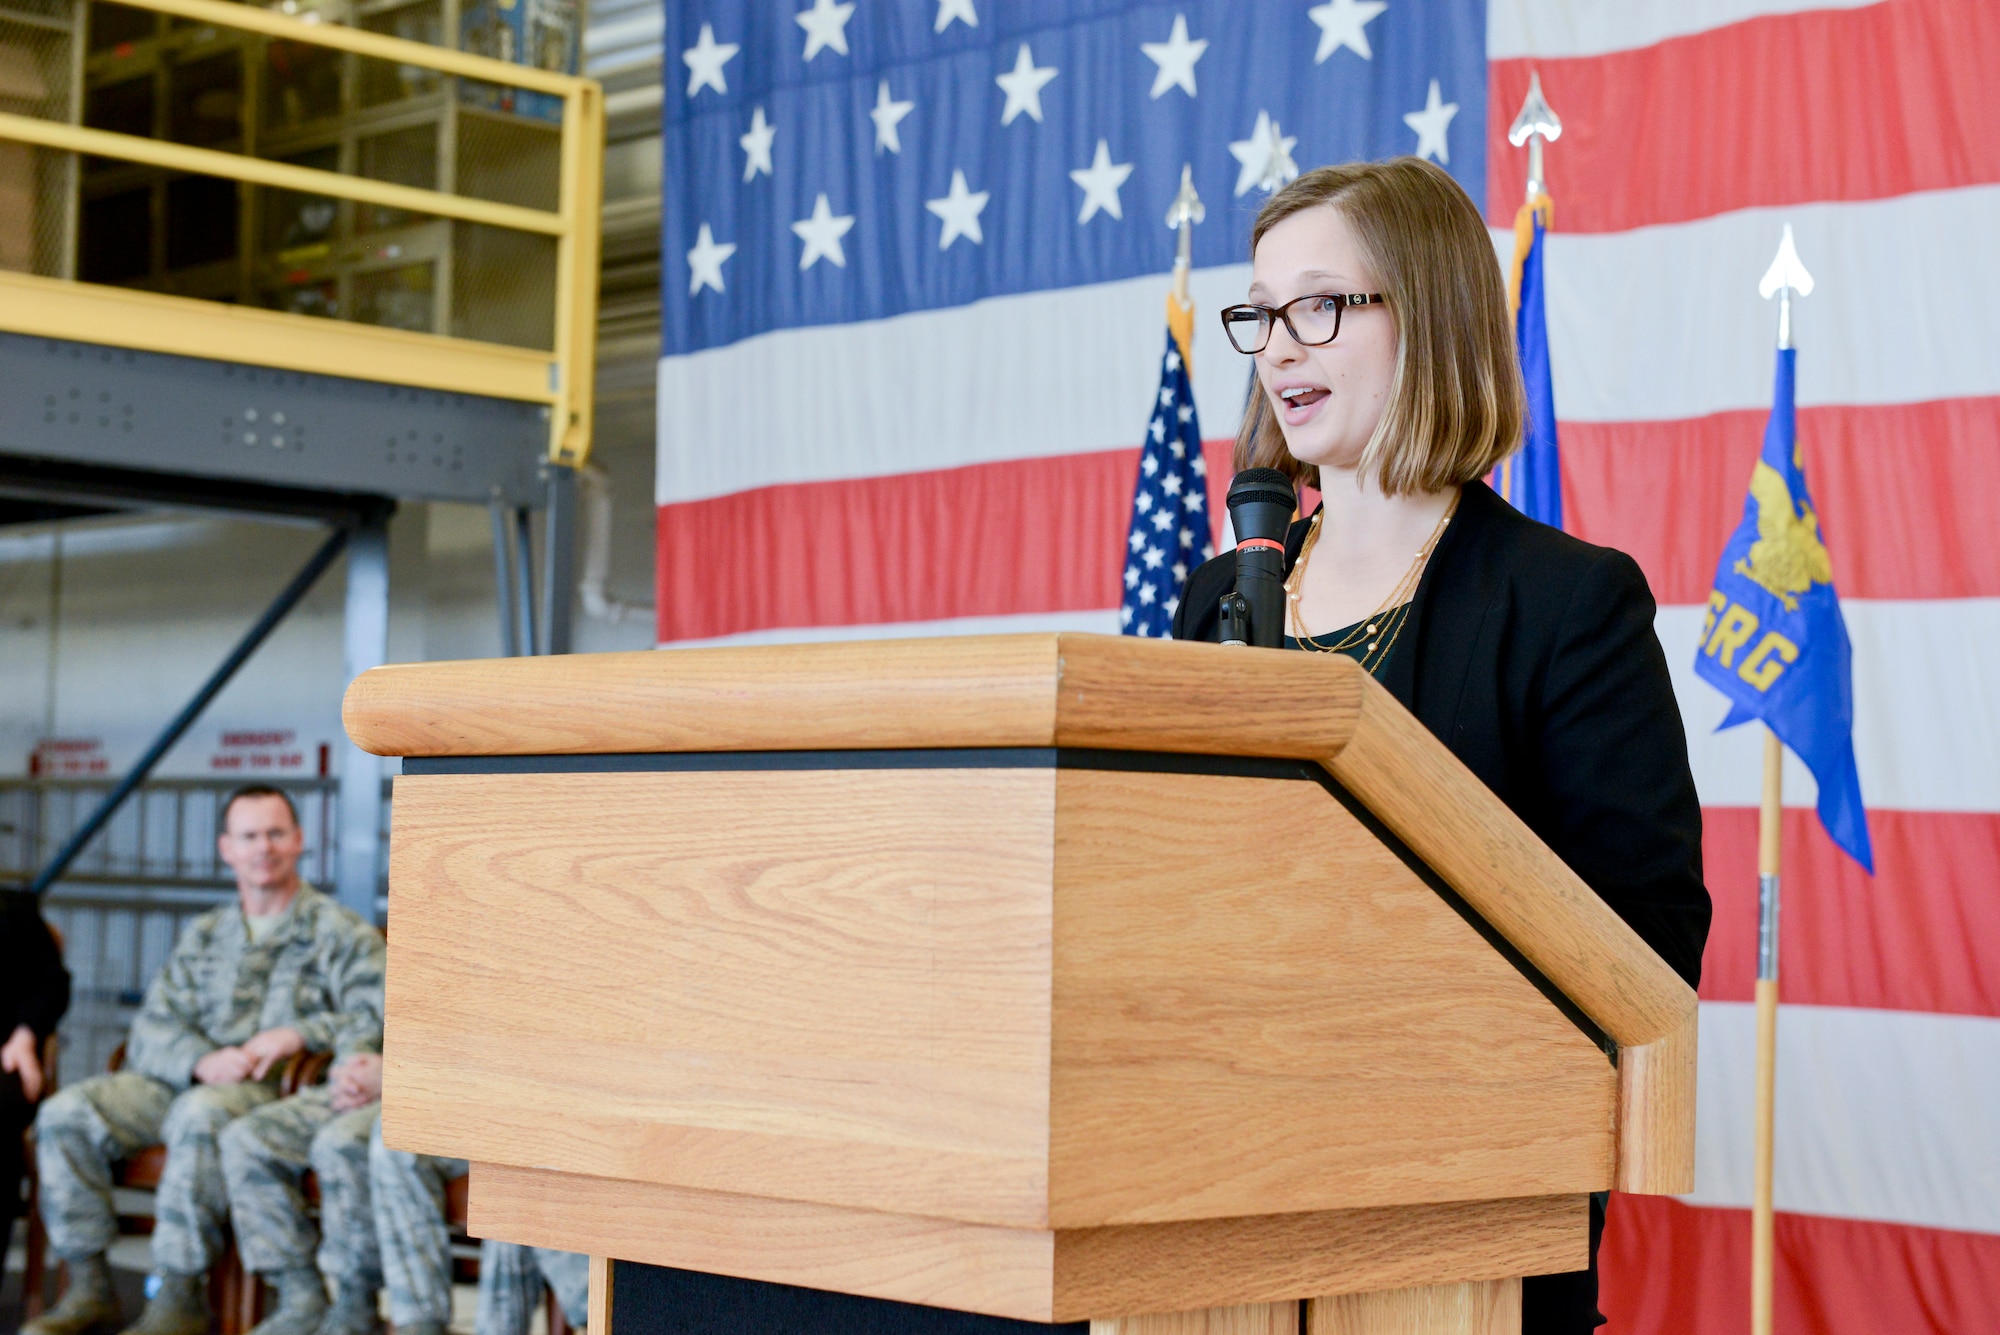 Amelia Schoeneman (standing at podium), representing Congressman Dave Loebsack, speaks to members of the 132d Wing (132WG), Des Moines, Iowa Intelligence Surveillance Reconnaissance Group (ISRG) during the 132WG ISRG Activation Ceremony held in the 132WG Fire House on Saturday, March 7, 2015.  This ceremony formally recognizes the official activation of the 132WG ISRG.  (U.S. Air National Guard photo by Staff Sgt. Linda K. Burger/Released)